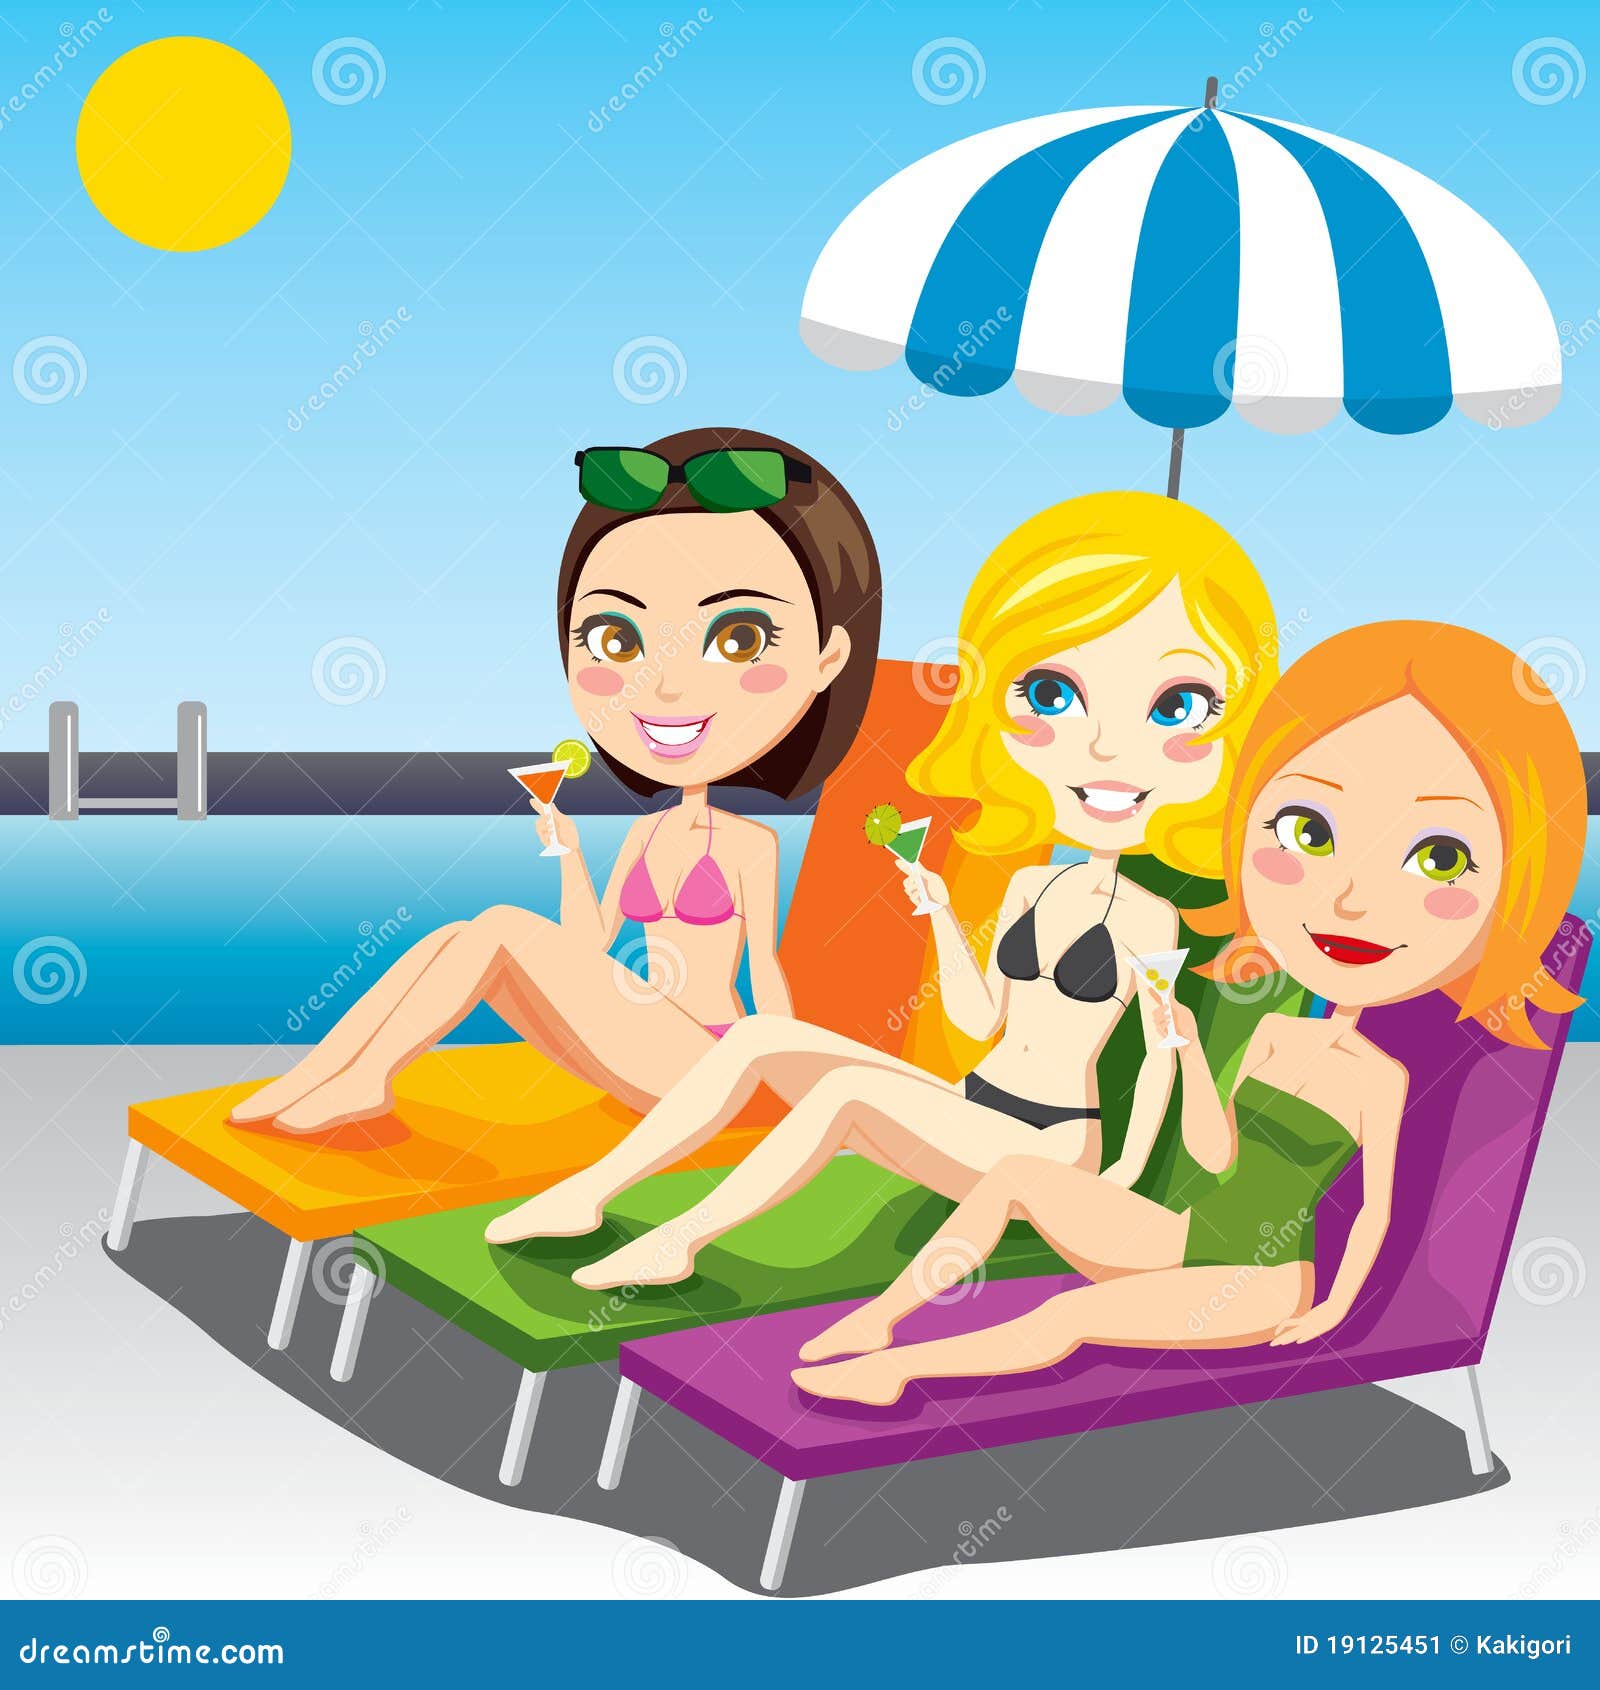 free clipart woman on the beach - photo #28